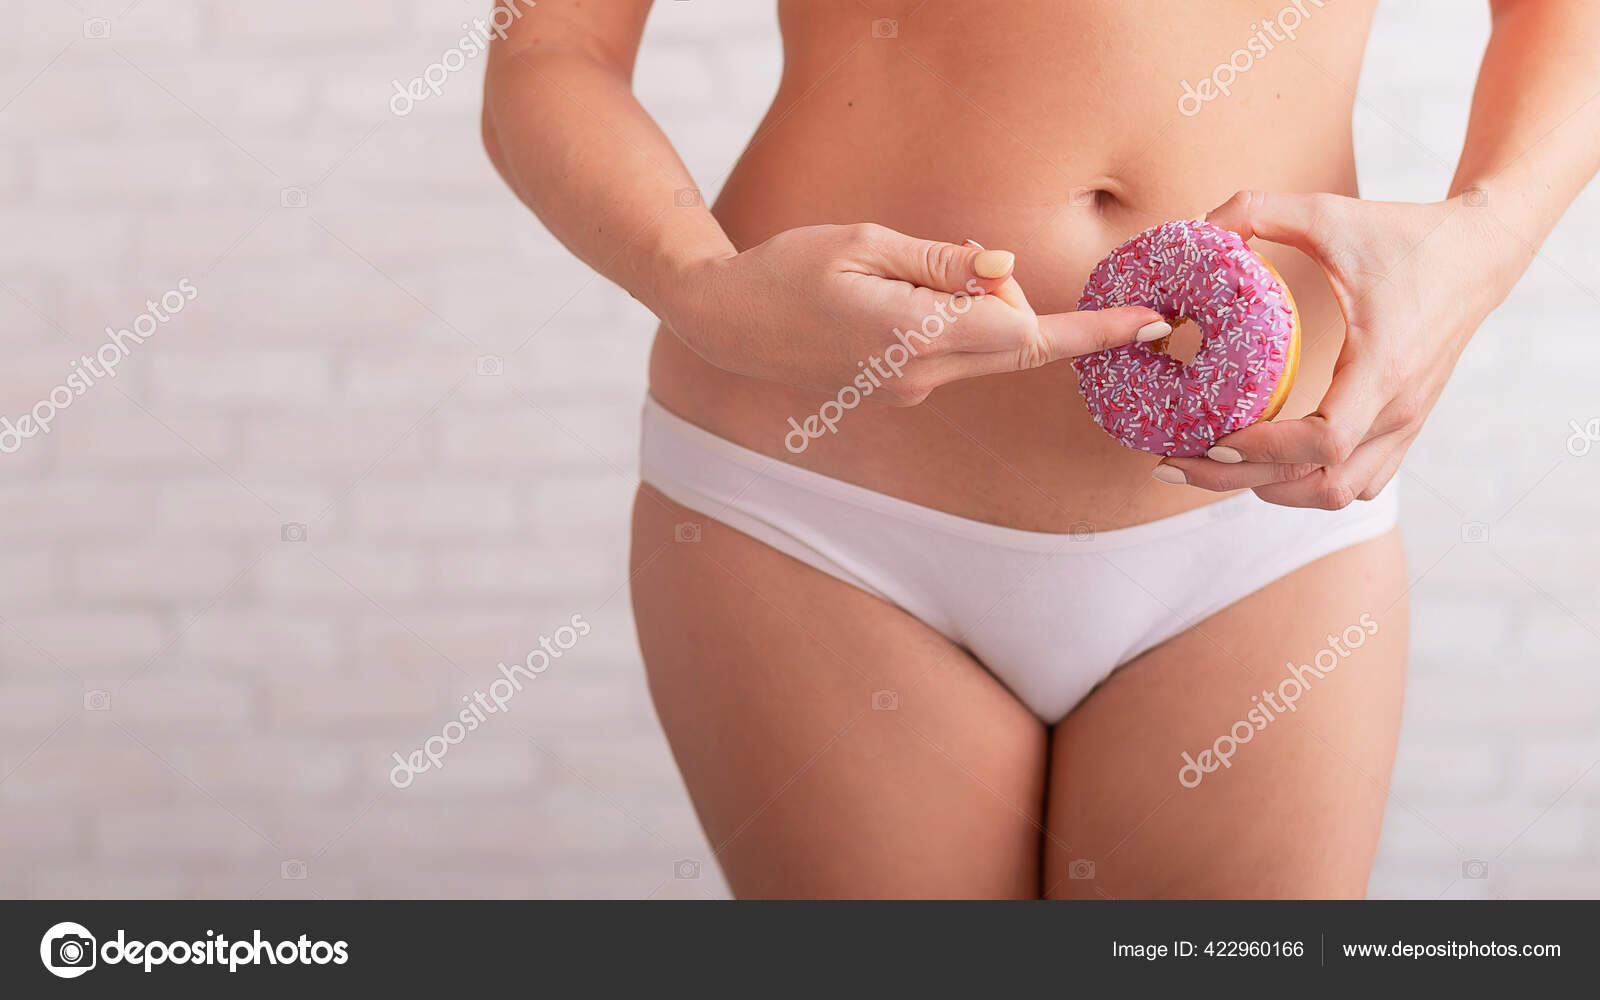 A faceless woman in white panties holds a pink donut imitating